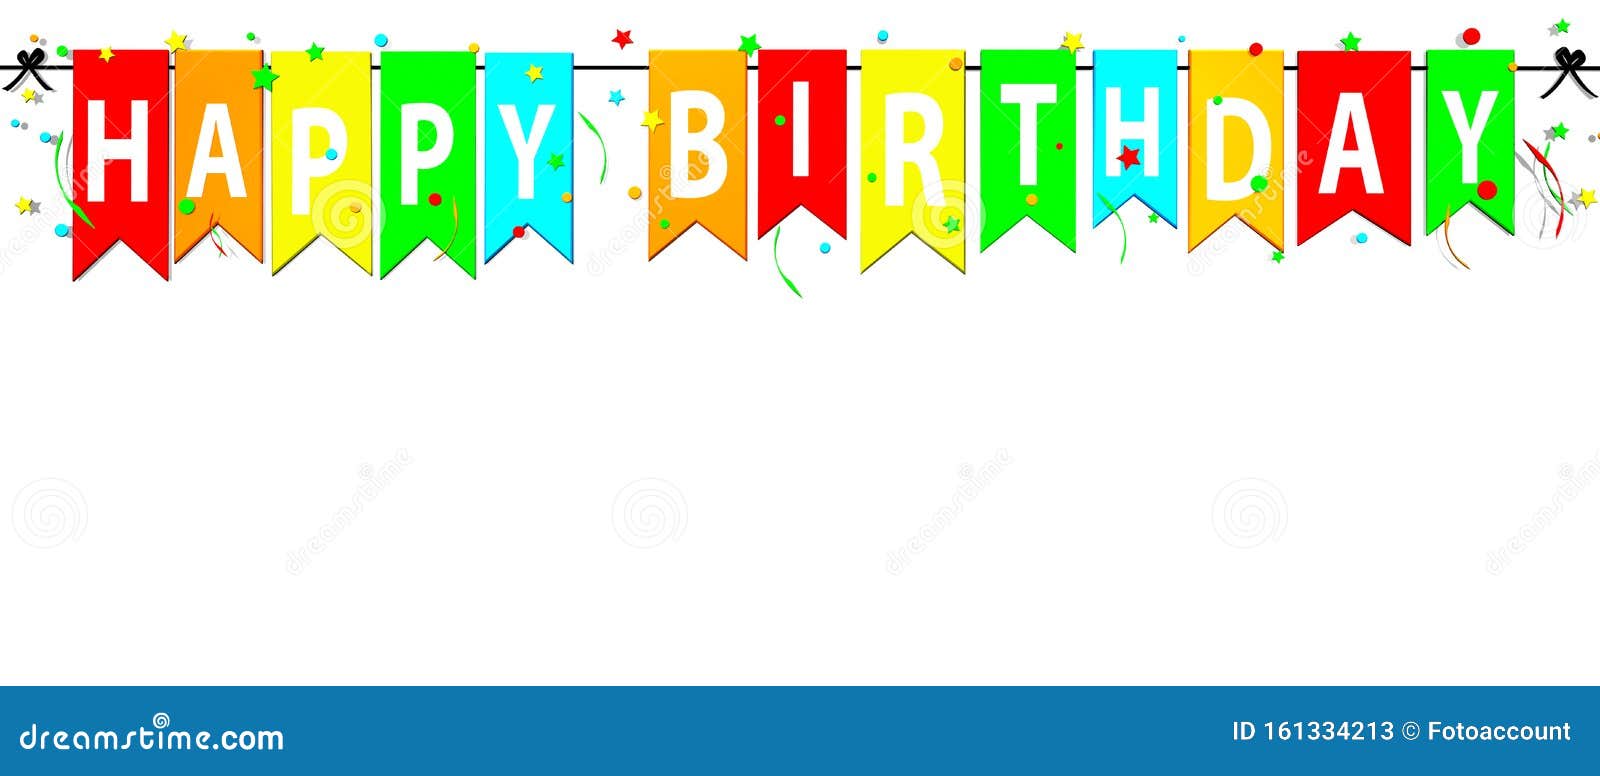 Happy Birthday Banner, Background - 3D Illustration Isolated on ...